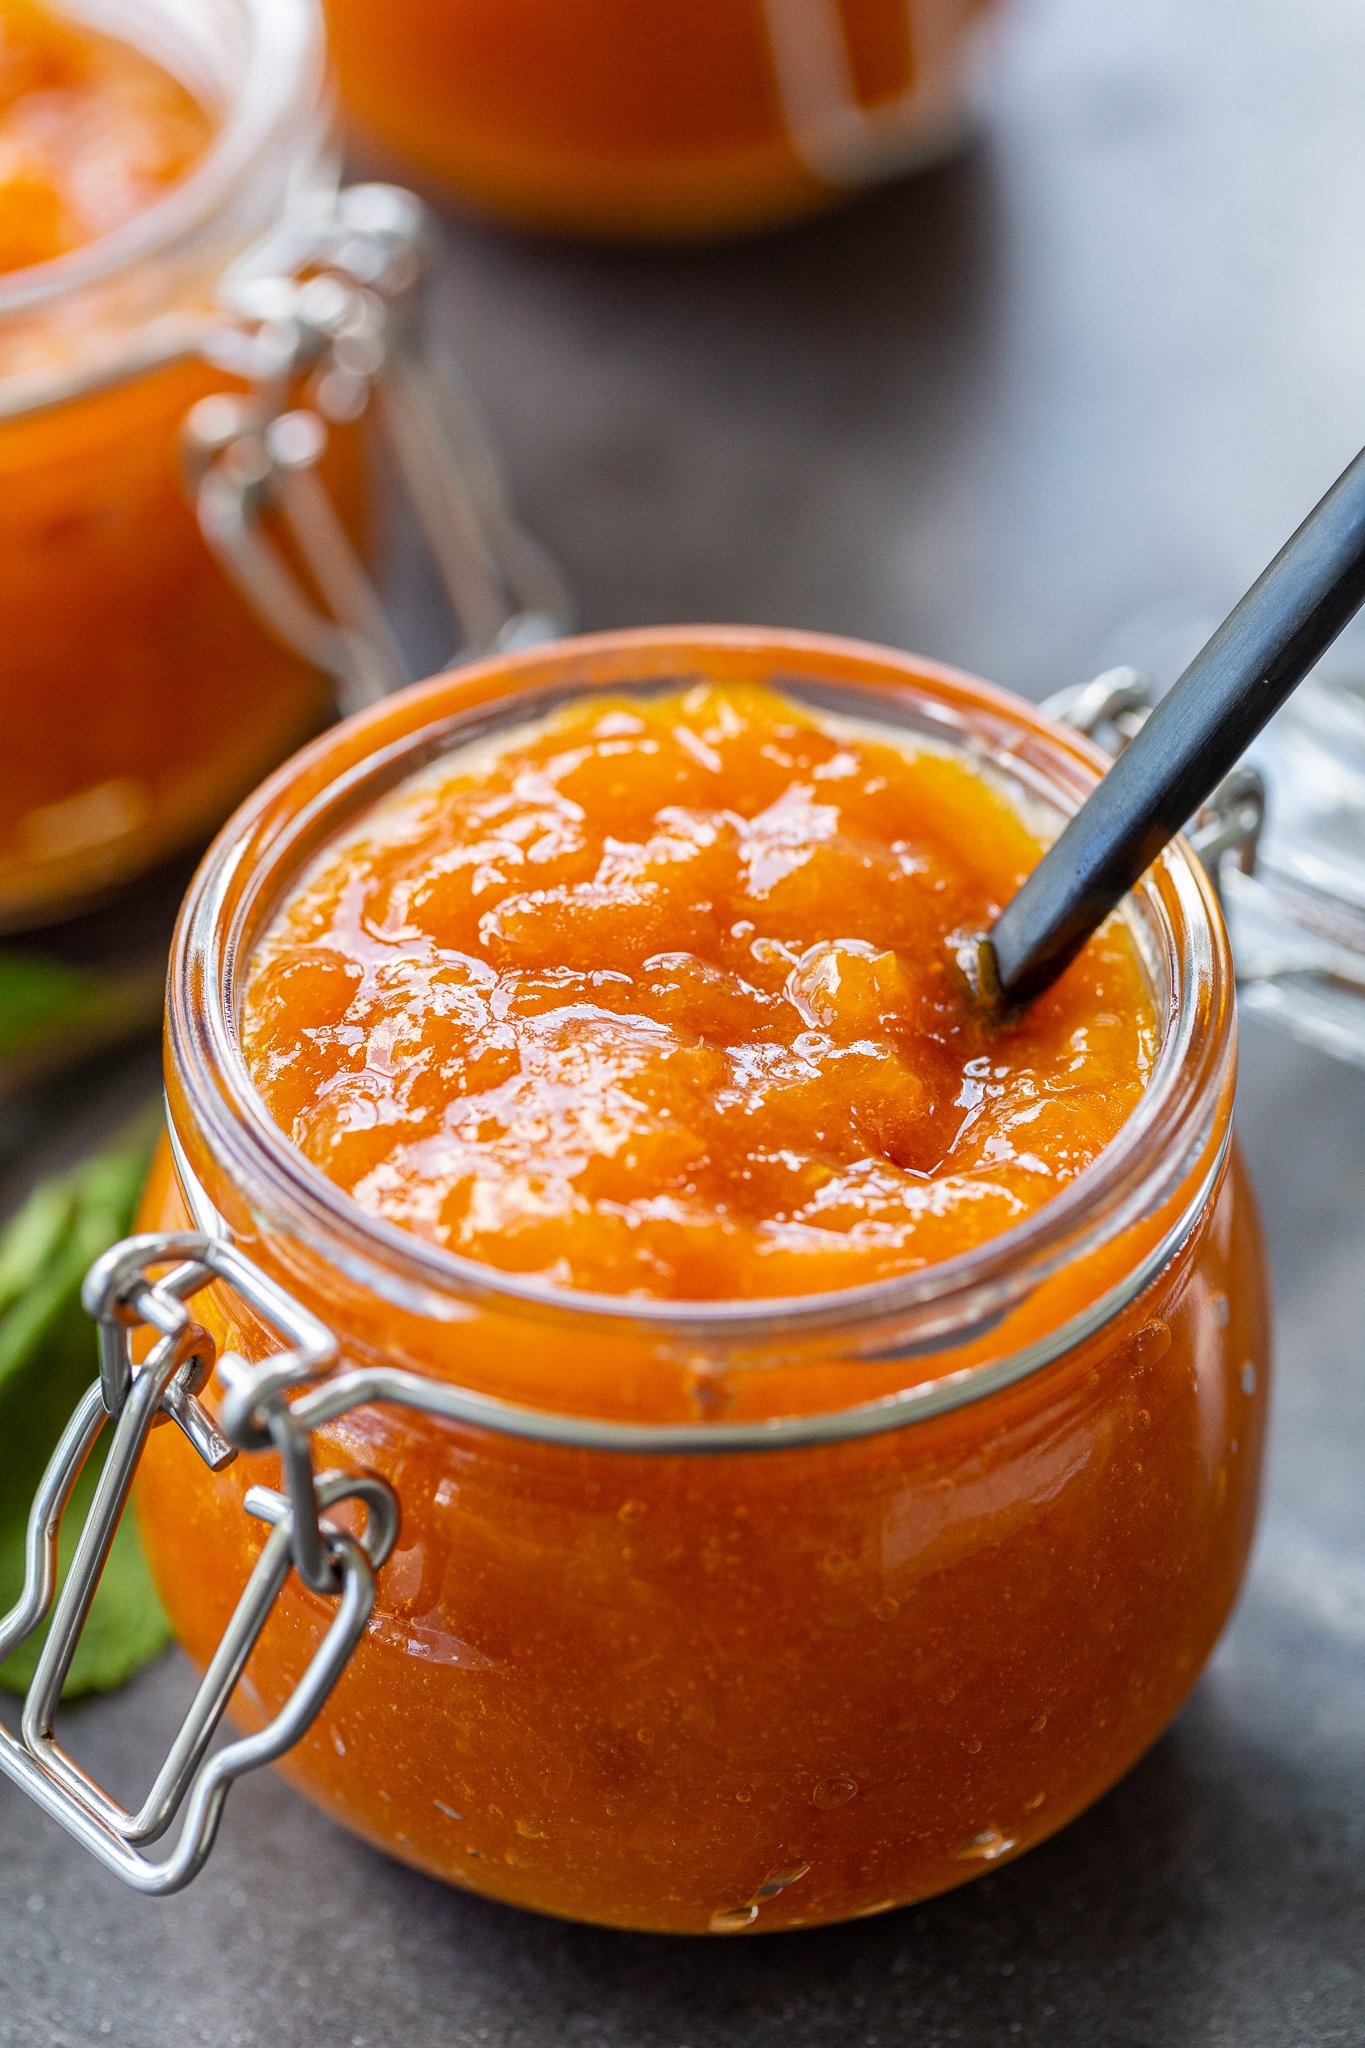 apricot-jam-recipe-only-2-ingredients-momsdish